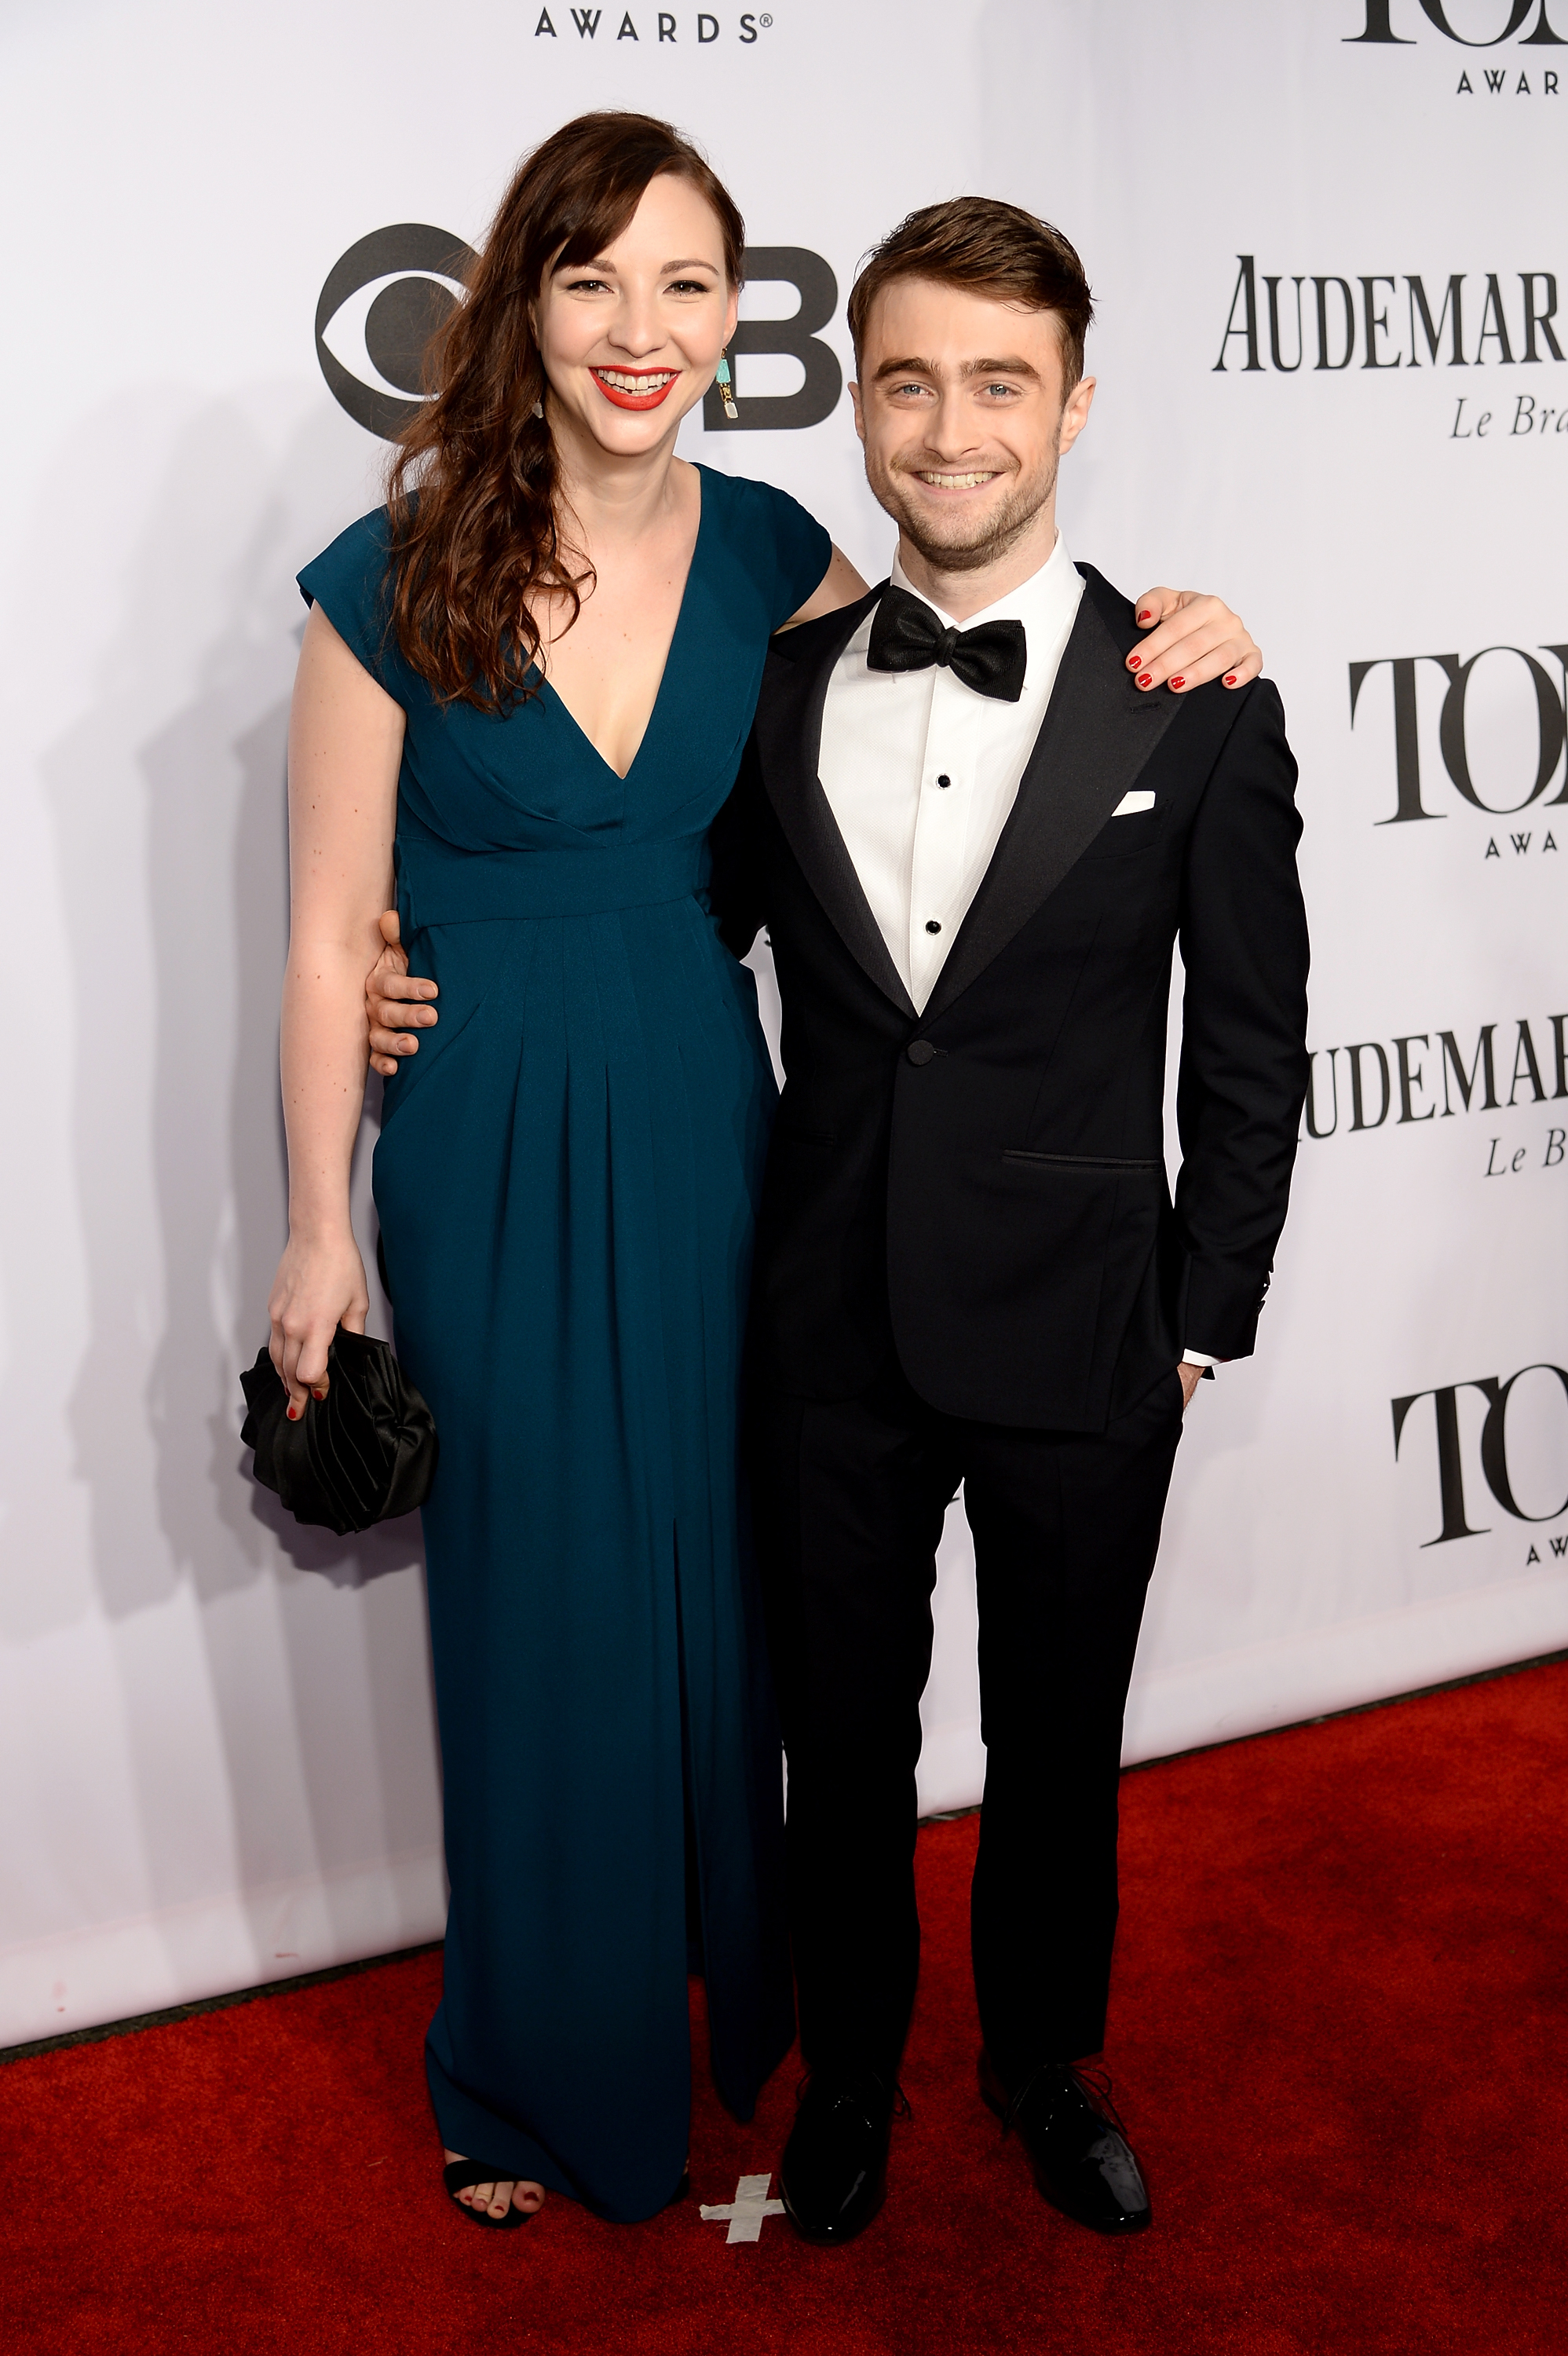 Erin Darke and Daniel Radcliffe attend the 68th Annual Tony Awards at Radio City Music Hall on June 8, 2014 in New York City.